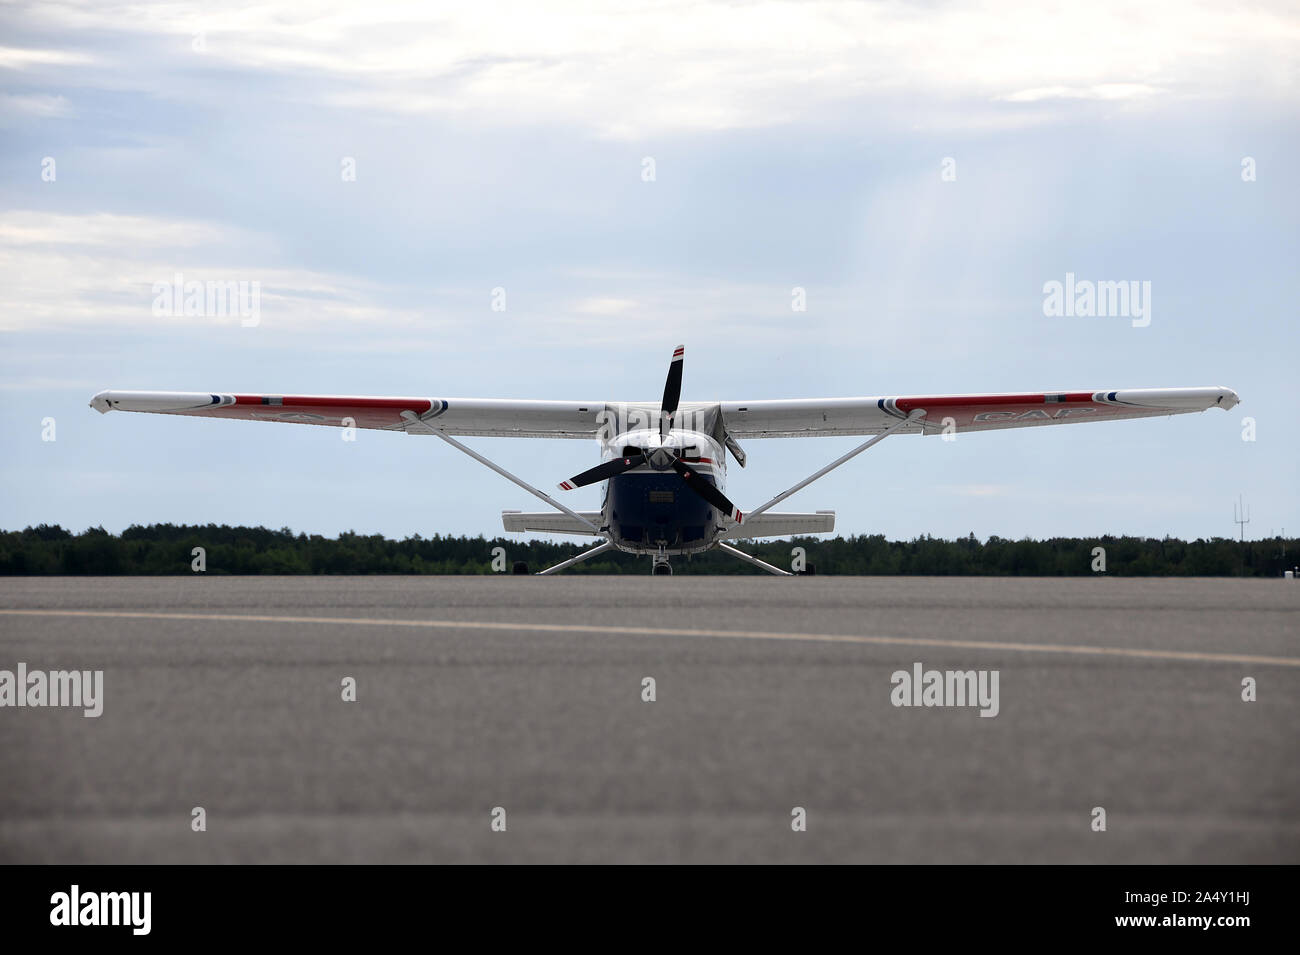 A Civil Air Patrol plane waits on the flight line for takeoff Aug. 13, 2019 at Alpena Combat Readiness Training Center in Alpena, Mich. The IAA team partnered up with Civil Air Patrol to provide imagery analysis for exercises happening on the ground and to practice their skills for disaster response situations. (U.S. Air National Guard photo by Senior Airman Amber Mullen) Stock Photo